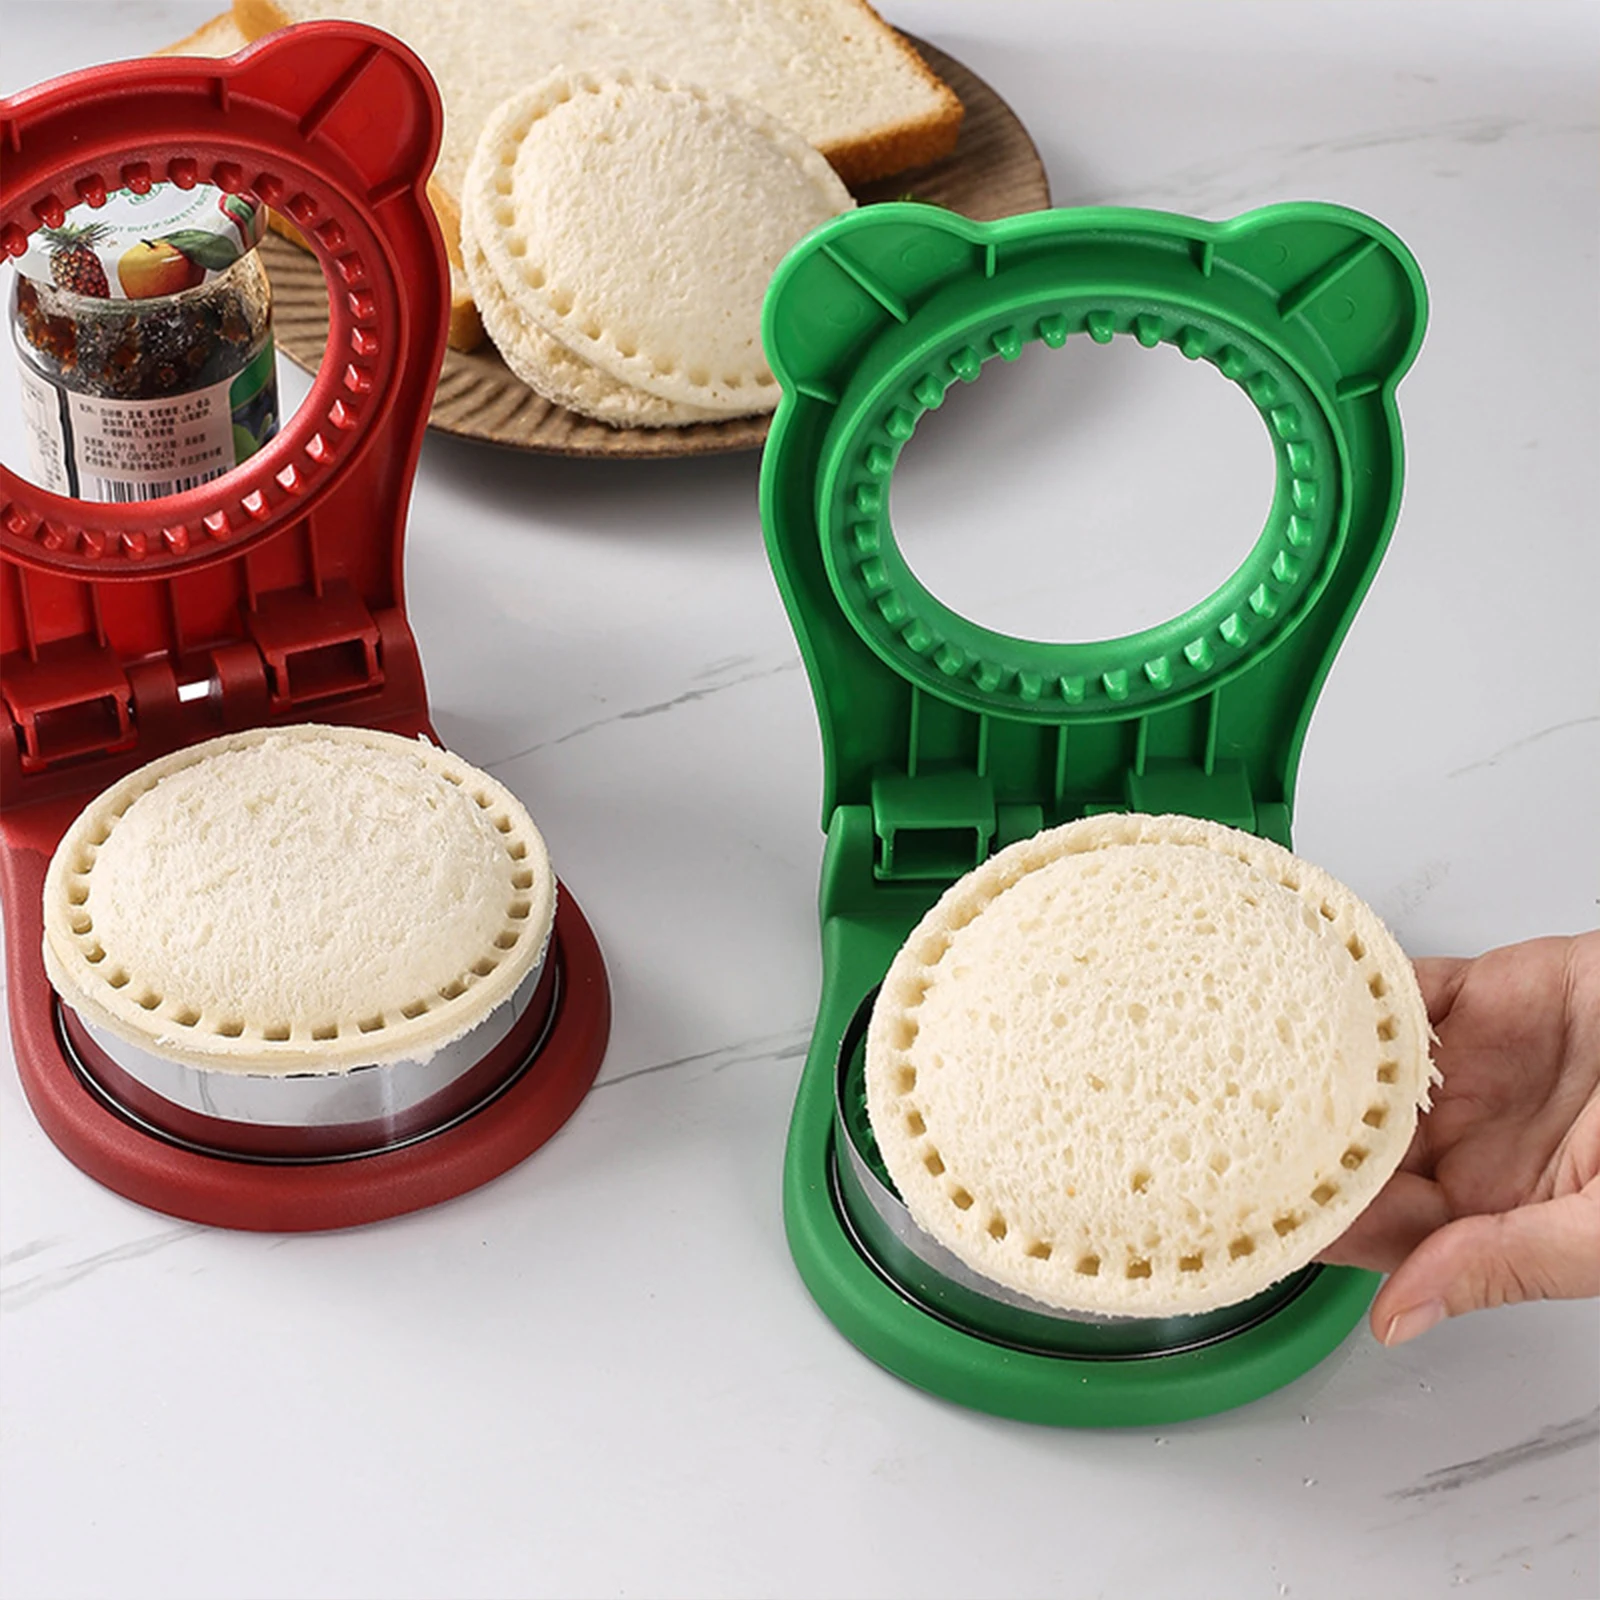 https://ae01.alicdn.com/kf/Sb6aafada2e6c47c2b72453e8693188f2h/Sandwich-Cutter-and-Sealer-Set-Round-Shape-for-Kids-Lunches-Uncrustables-Maker-Breakfast-Toast-Mold.jpg